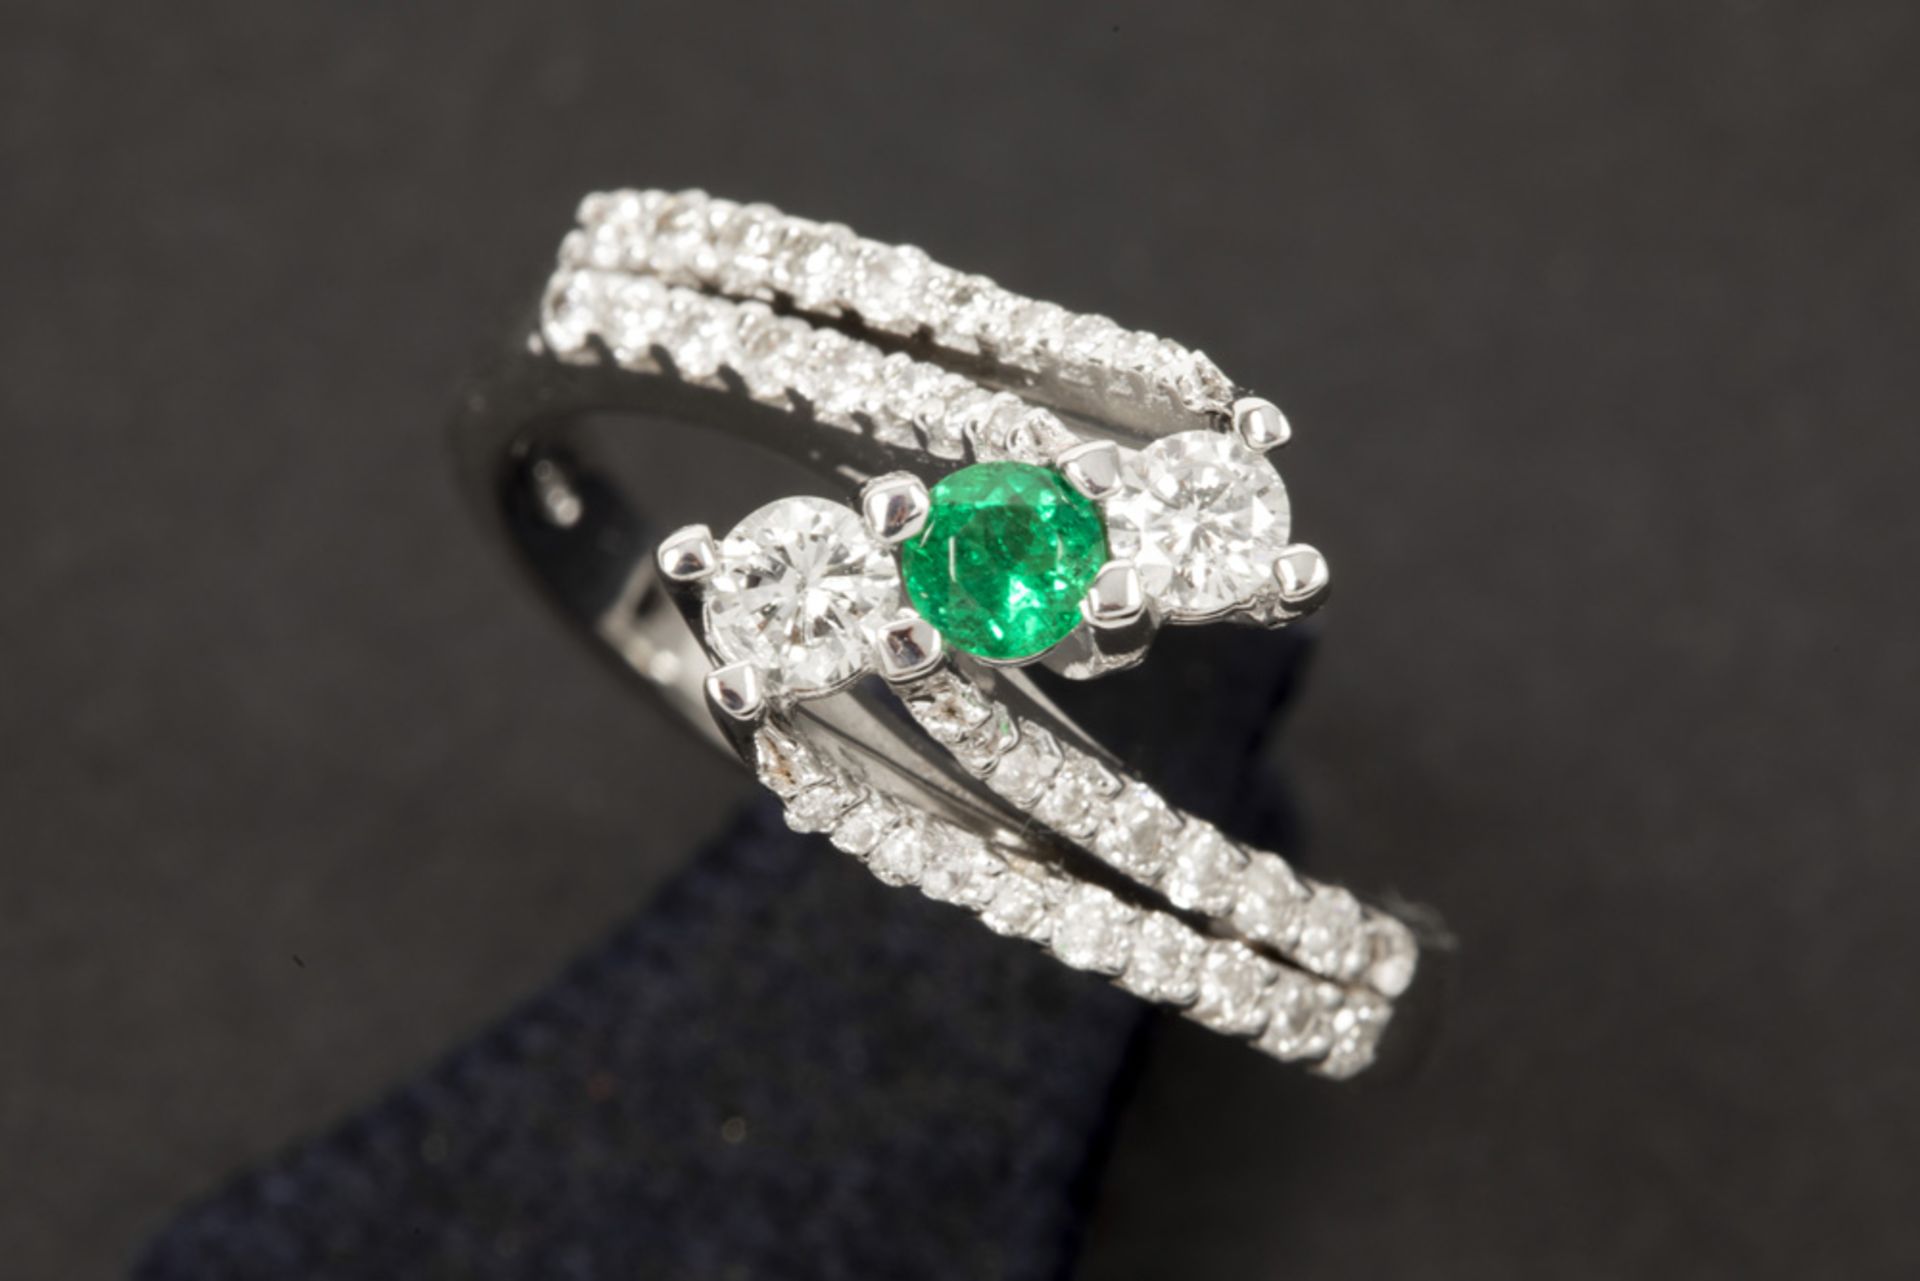 ring in white gold (18 carat) with a ca 0,15 carat Colombian emerald and ca 0,45 carat brilliant cut